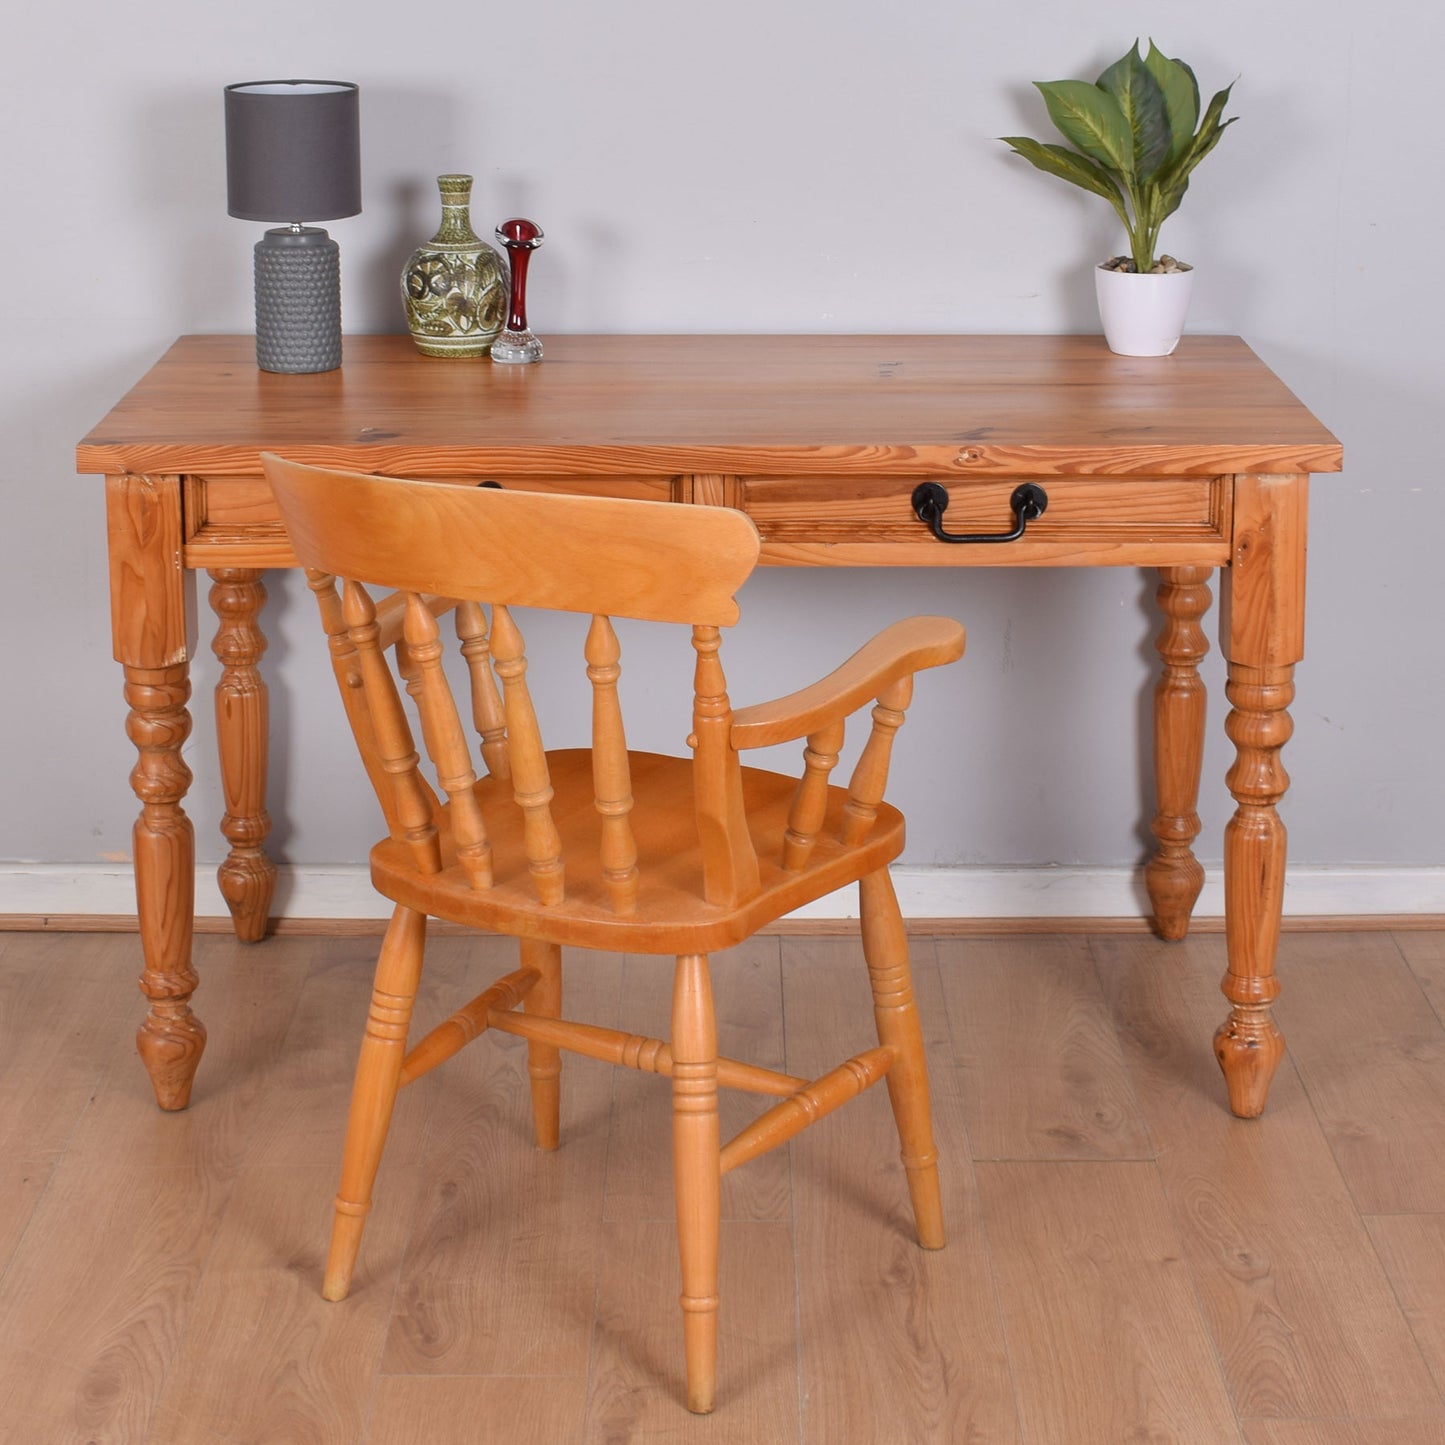 Restored Pine Desk and Chair